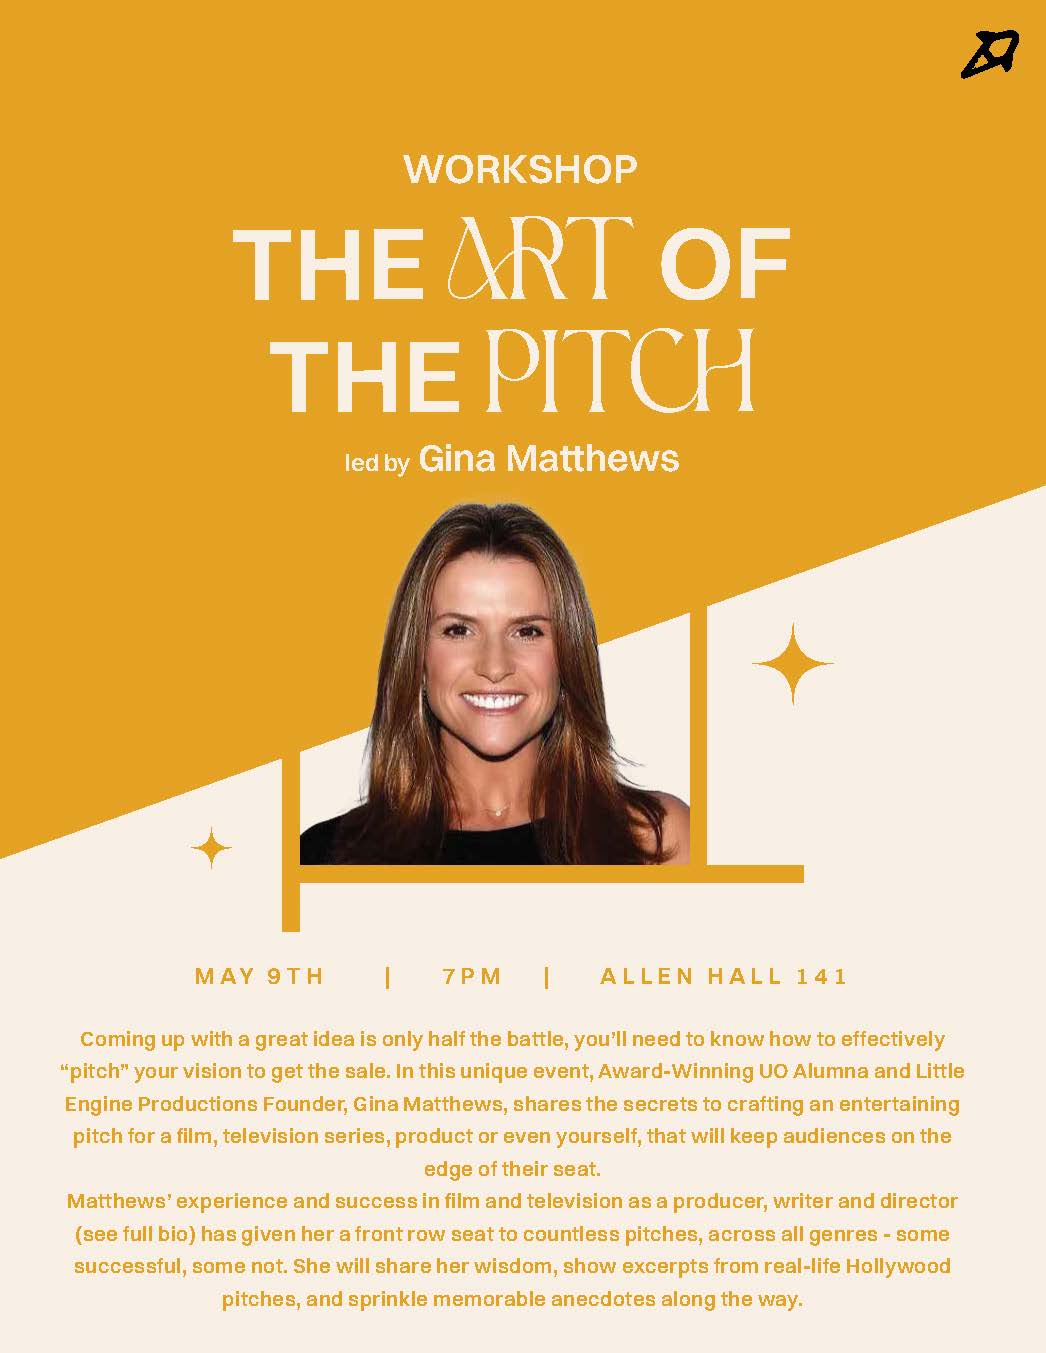 The Art of the Pitch Workshop with Gina Matthews